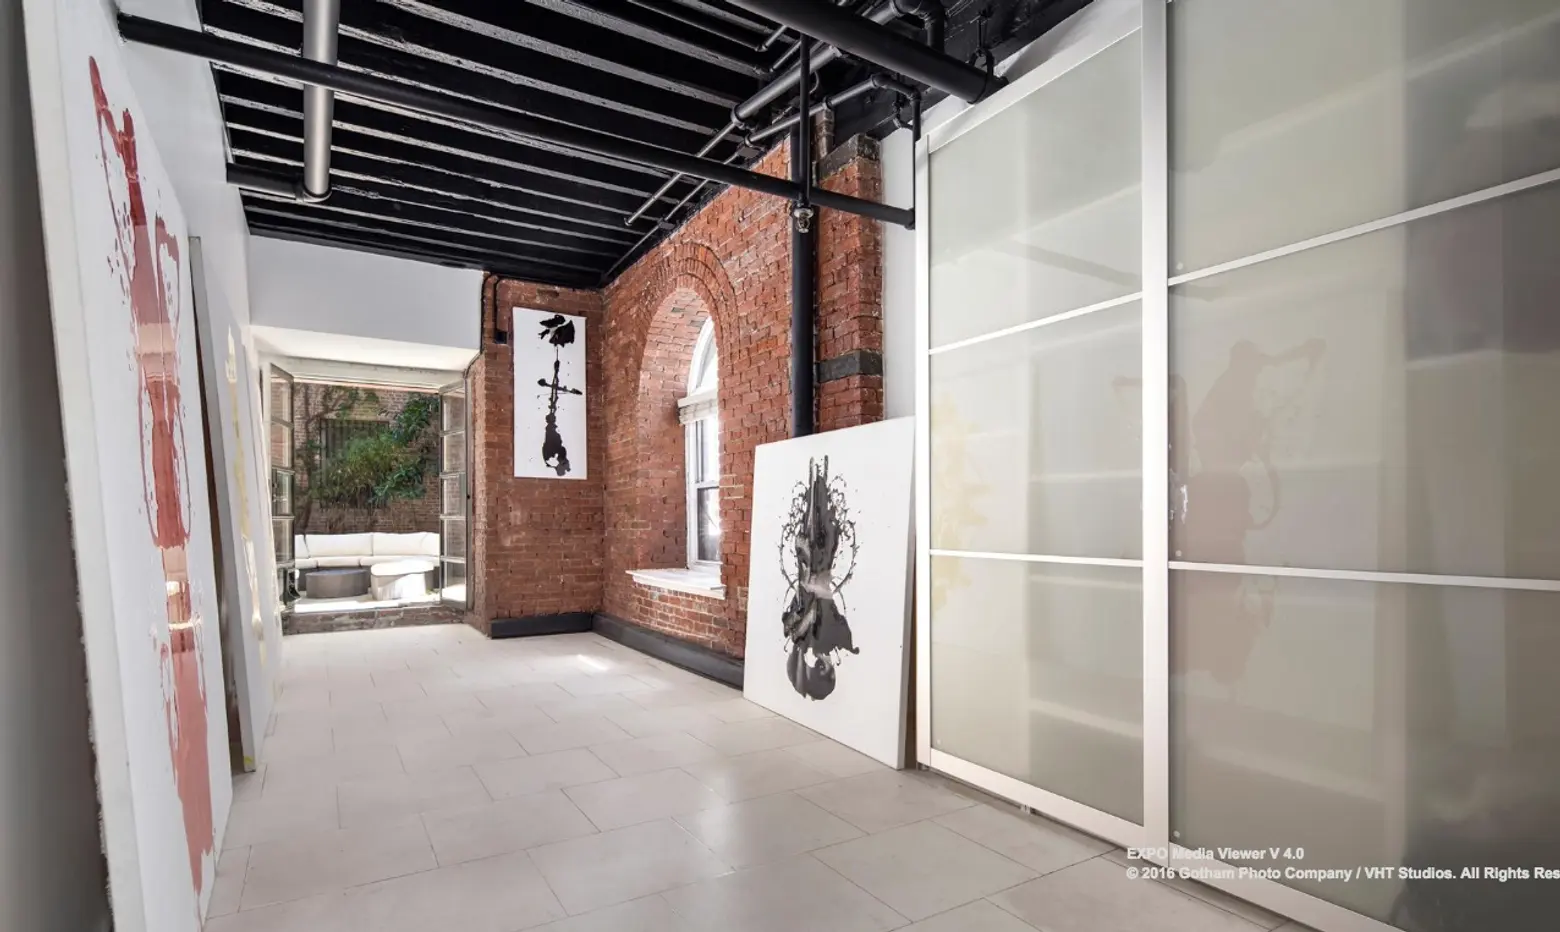 Financial District Loft Rental Comes With Its Own 800-Square-Foot Patio